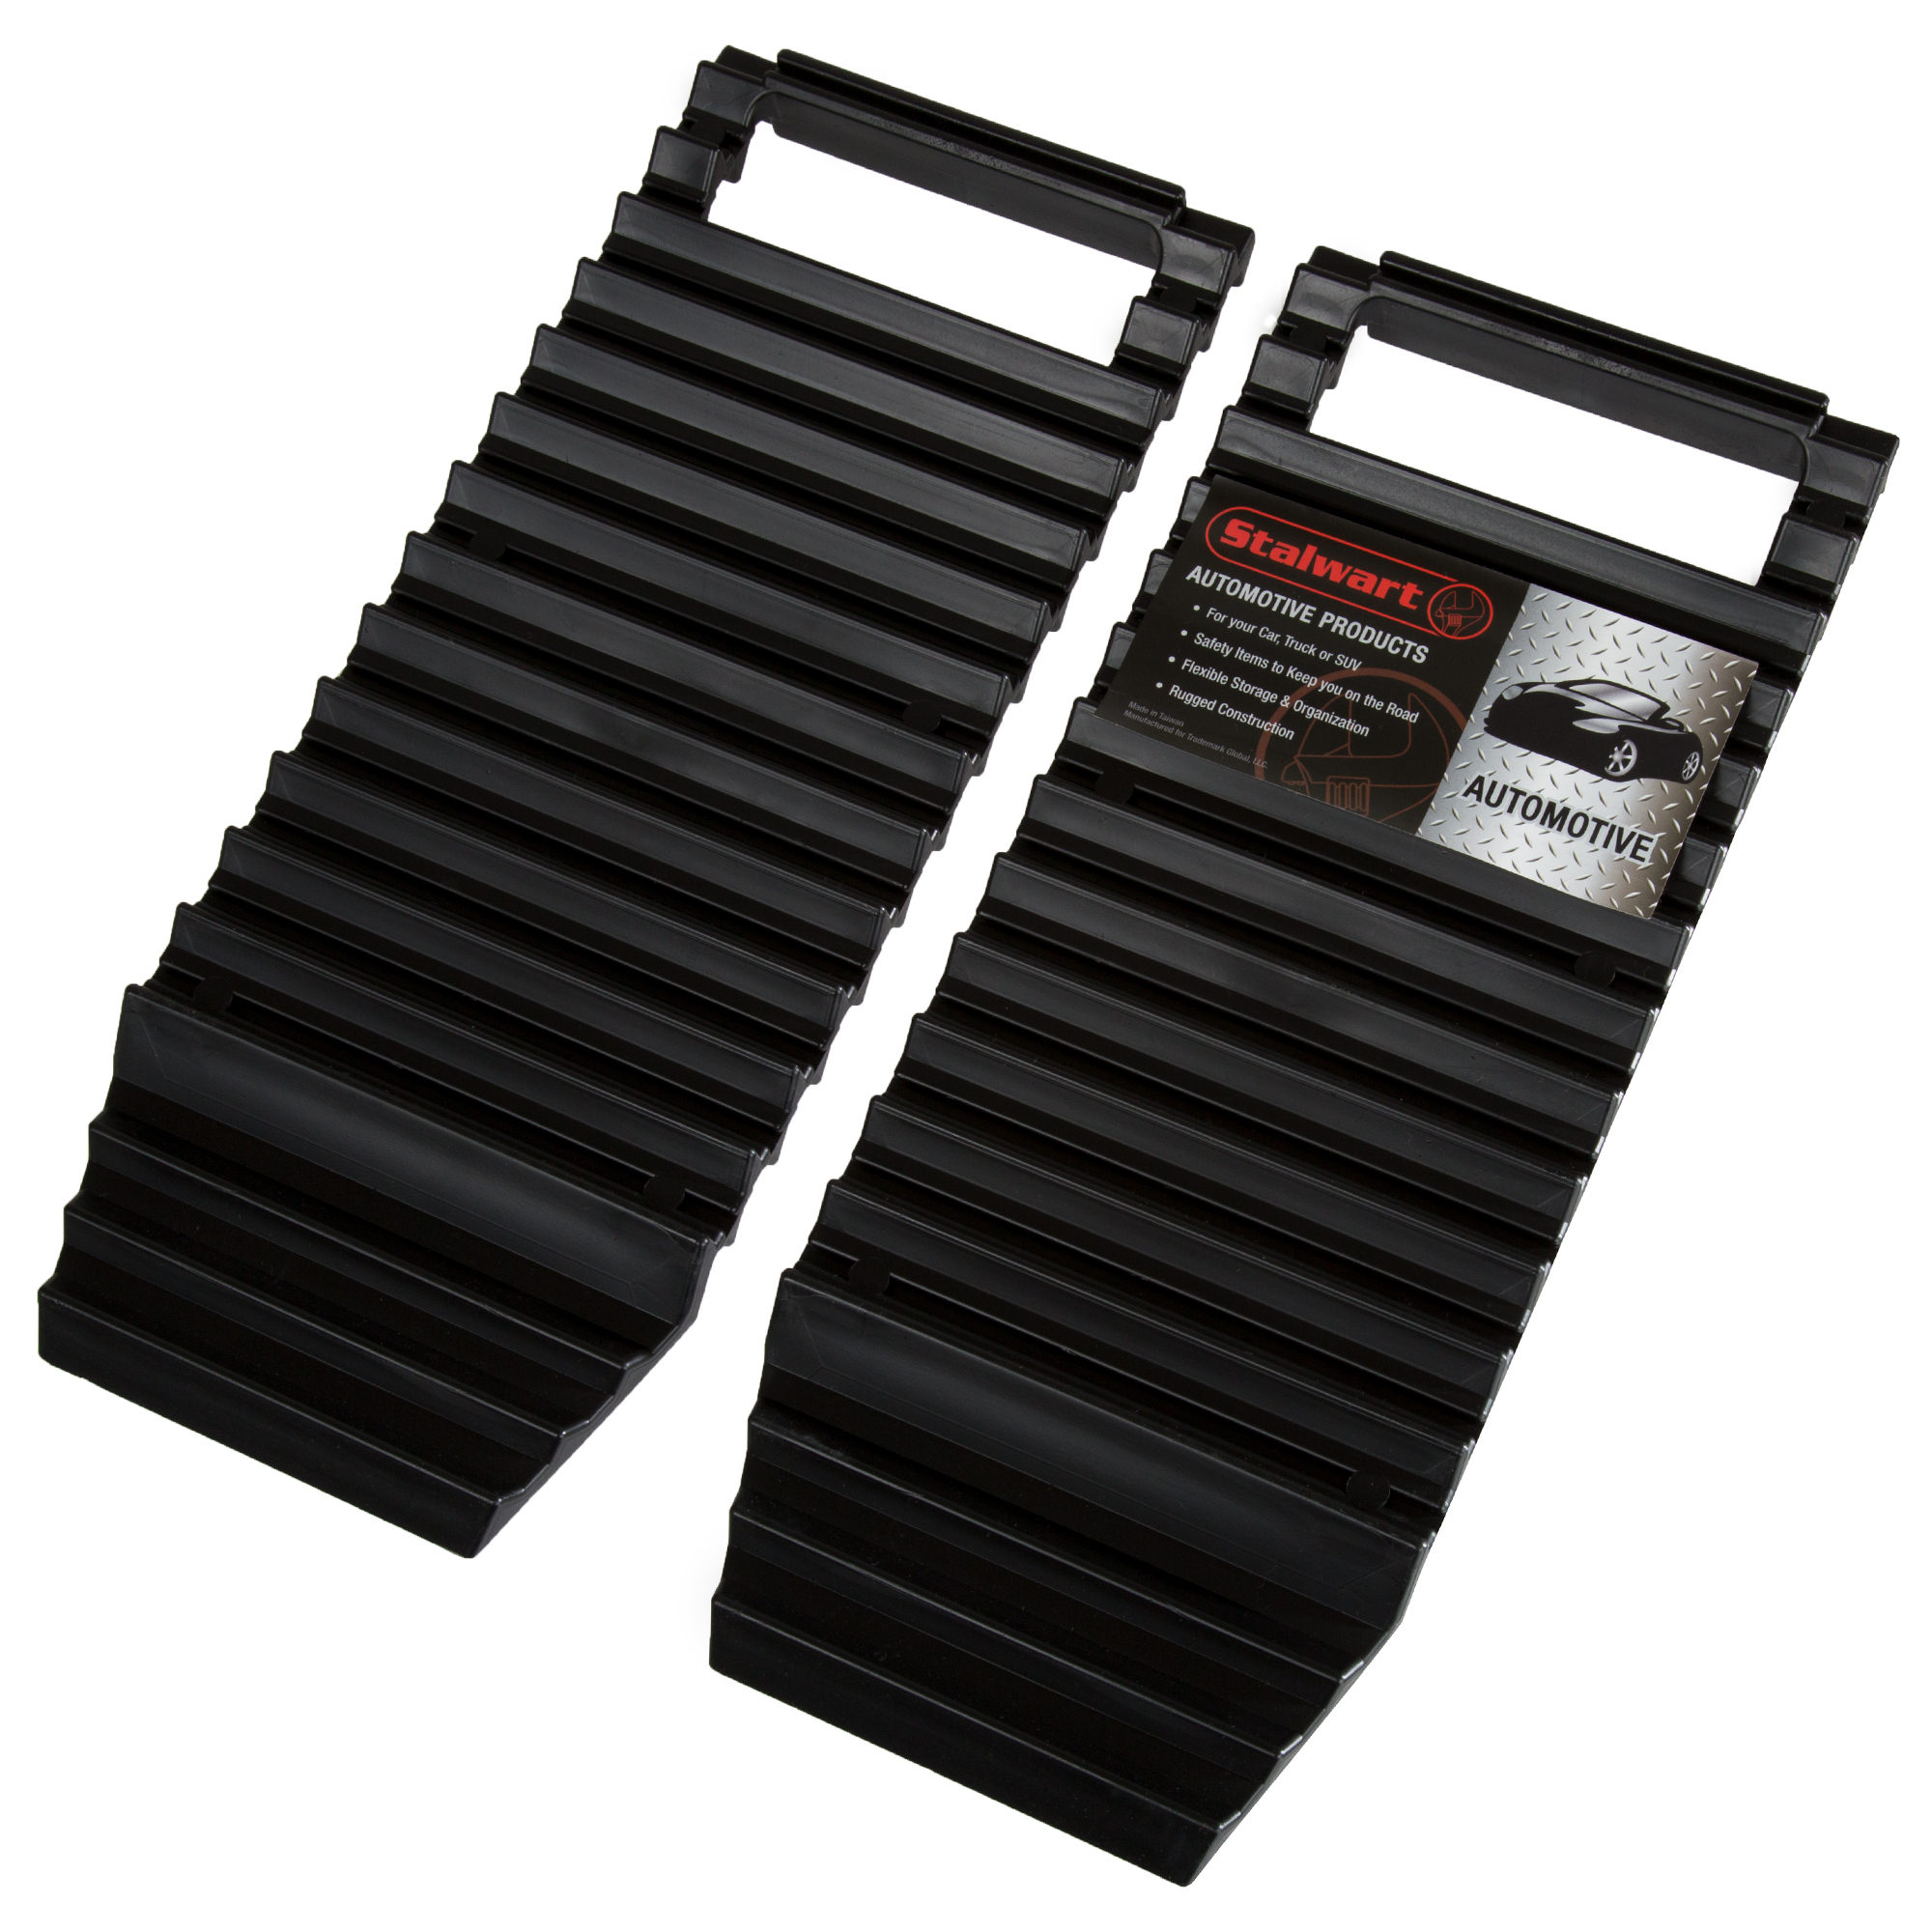 Stalwart Emergency Tire Traction Mats - Snow, Ice, Sand and More